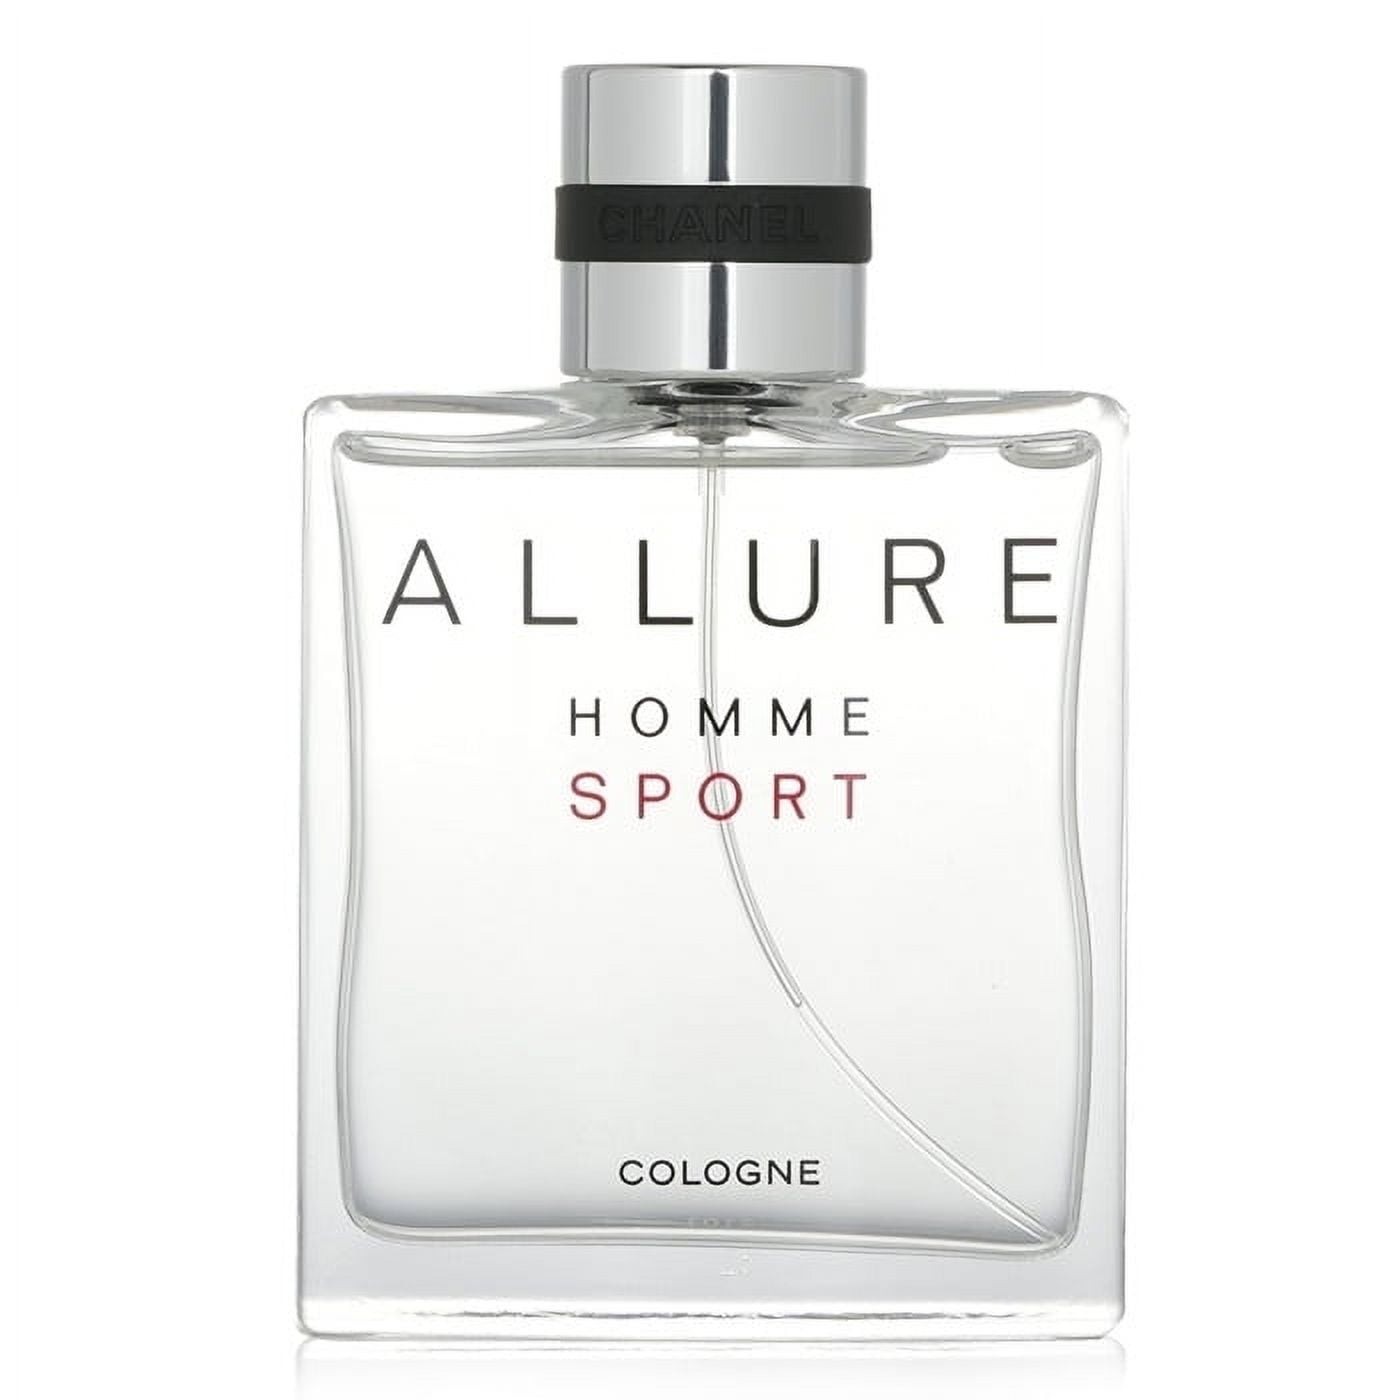 Allure Homme Sport Eau Extreme Cologne by Chanel